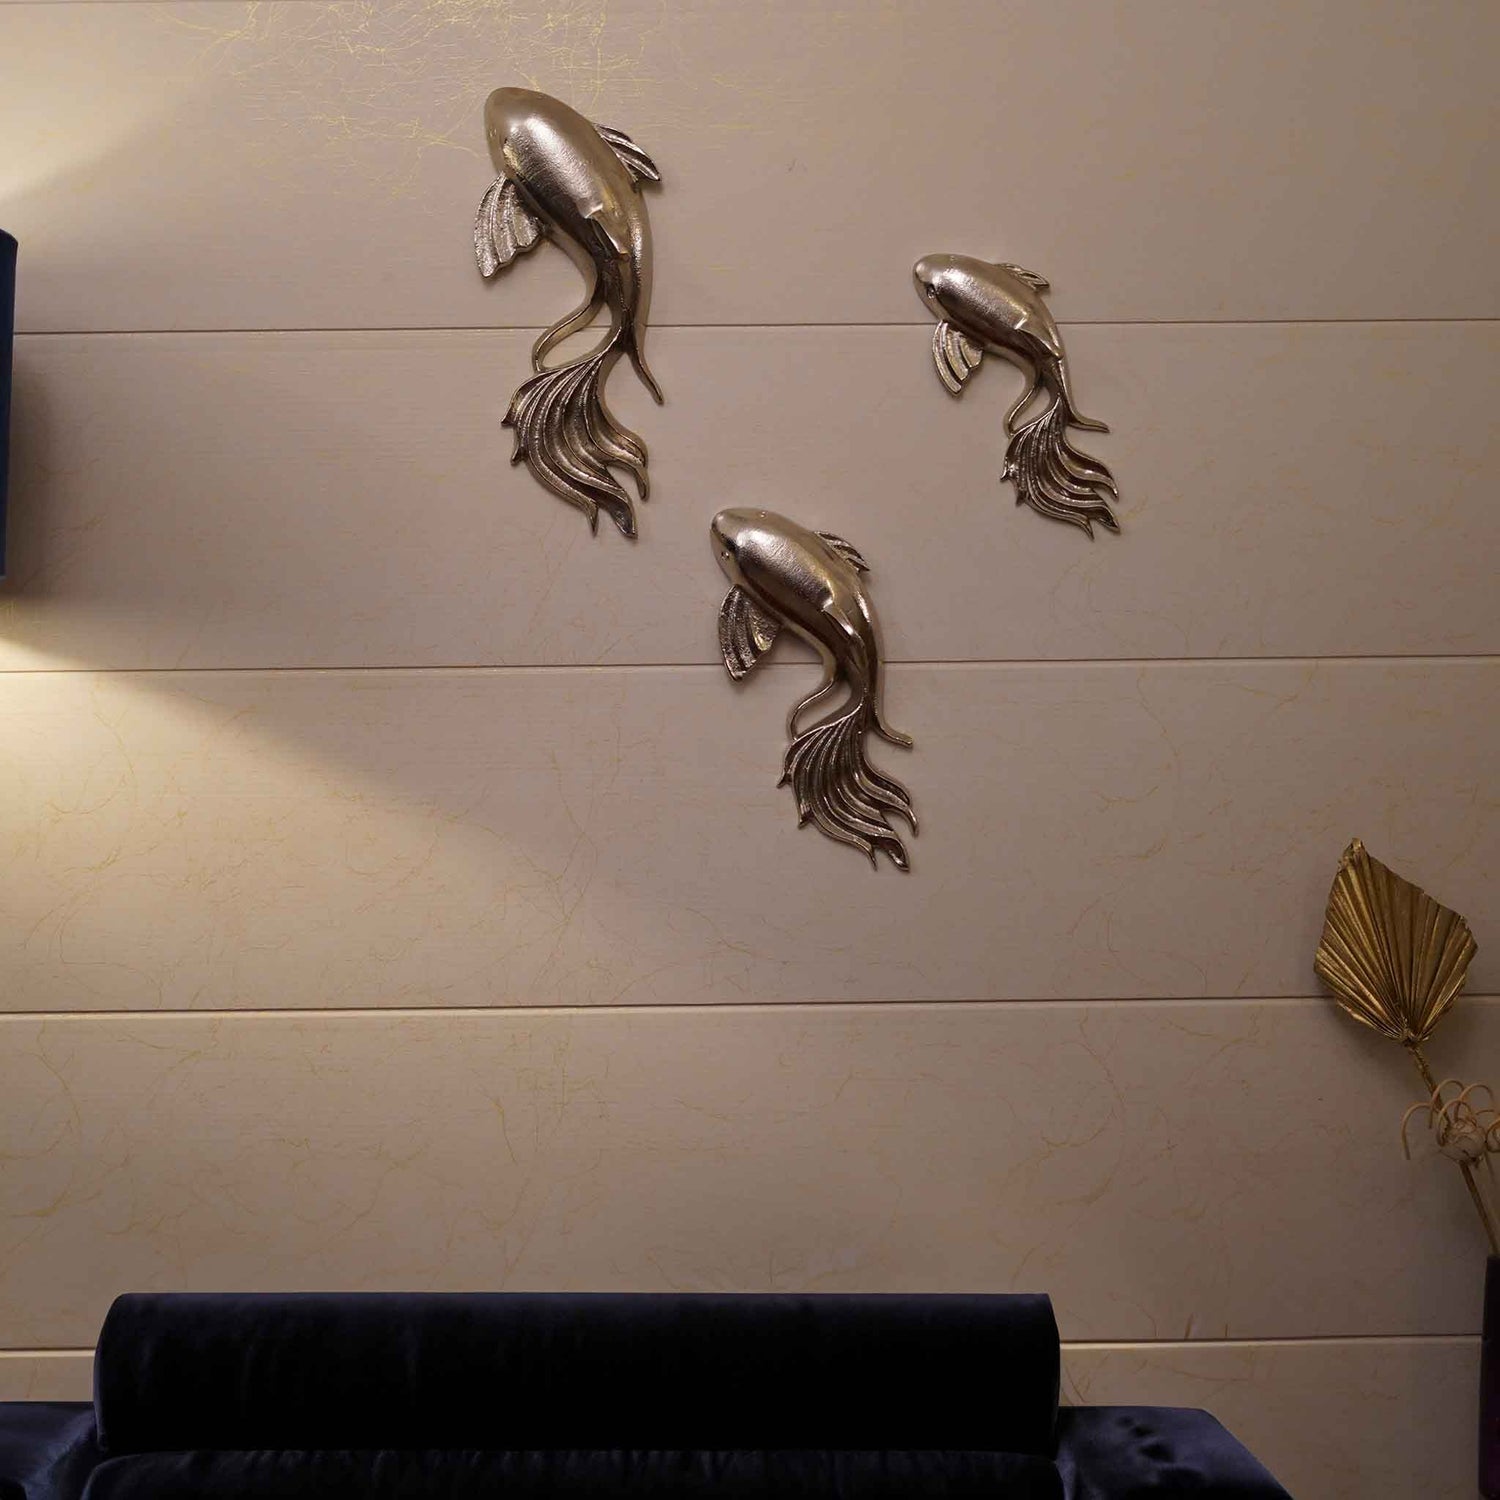 Set of 3 nickel chrome finish metallic wall art fish in a living room set-up